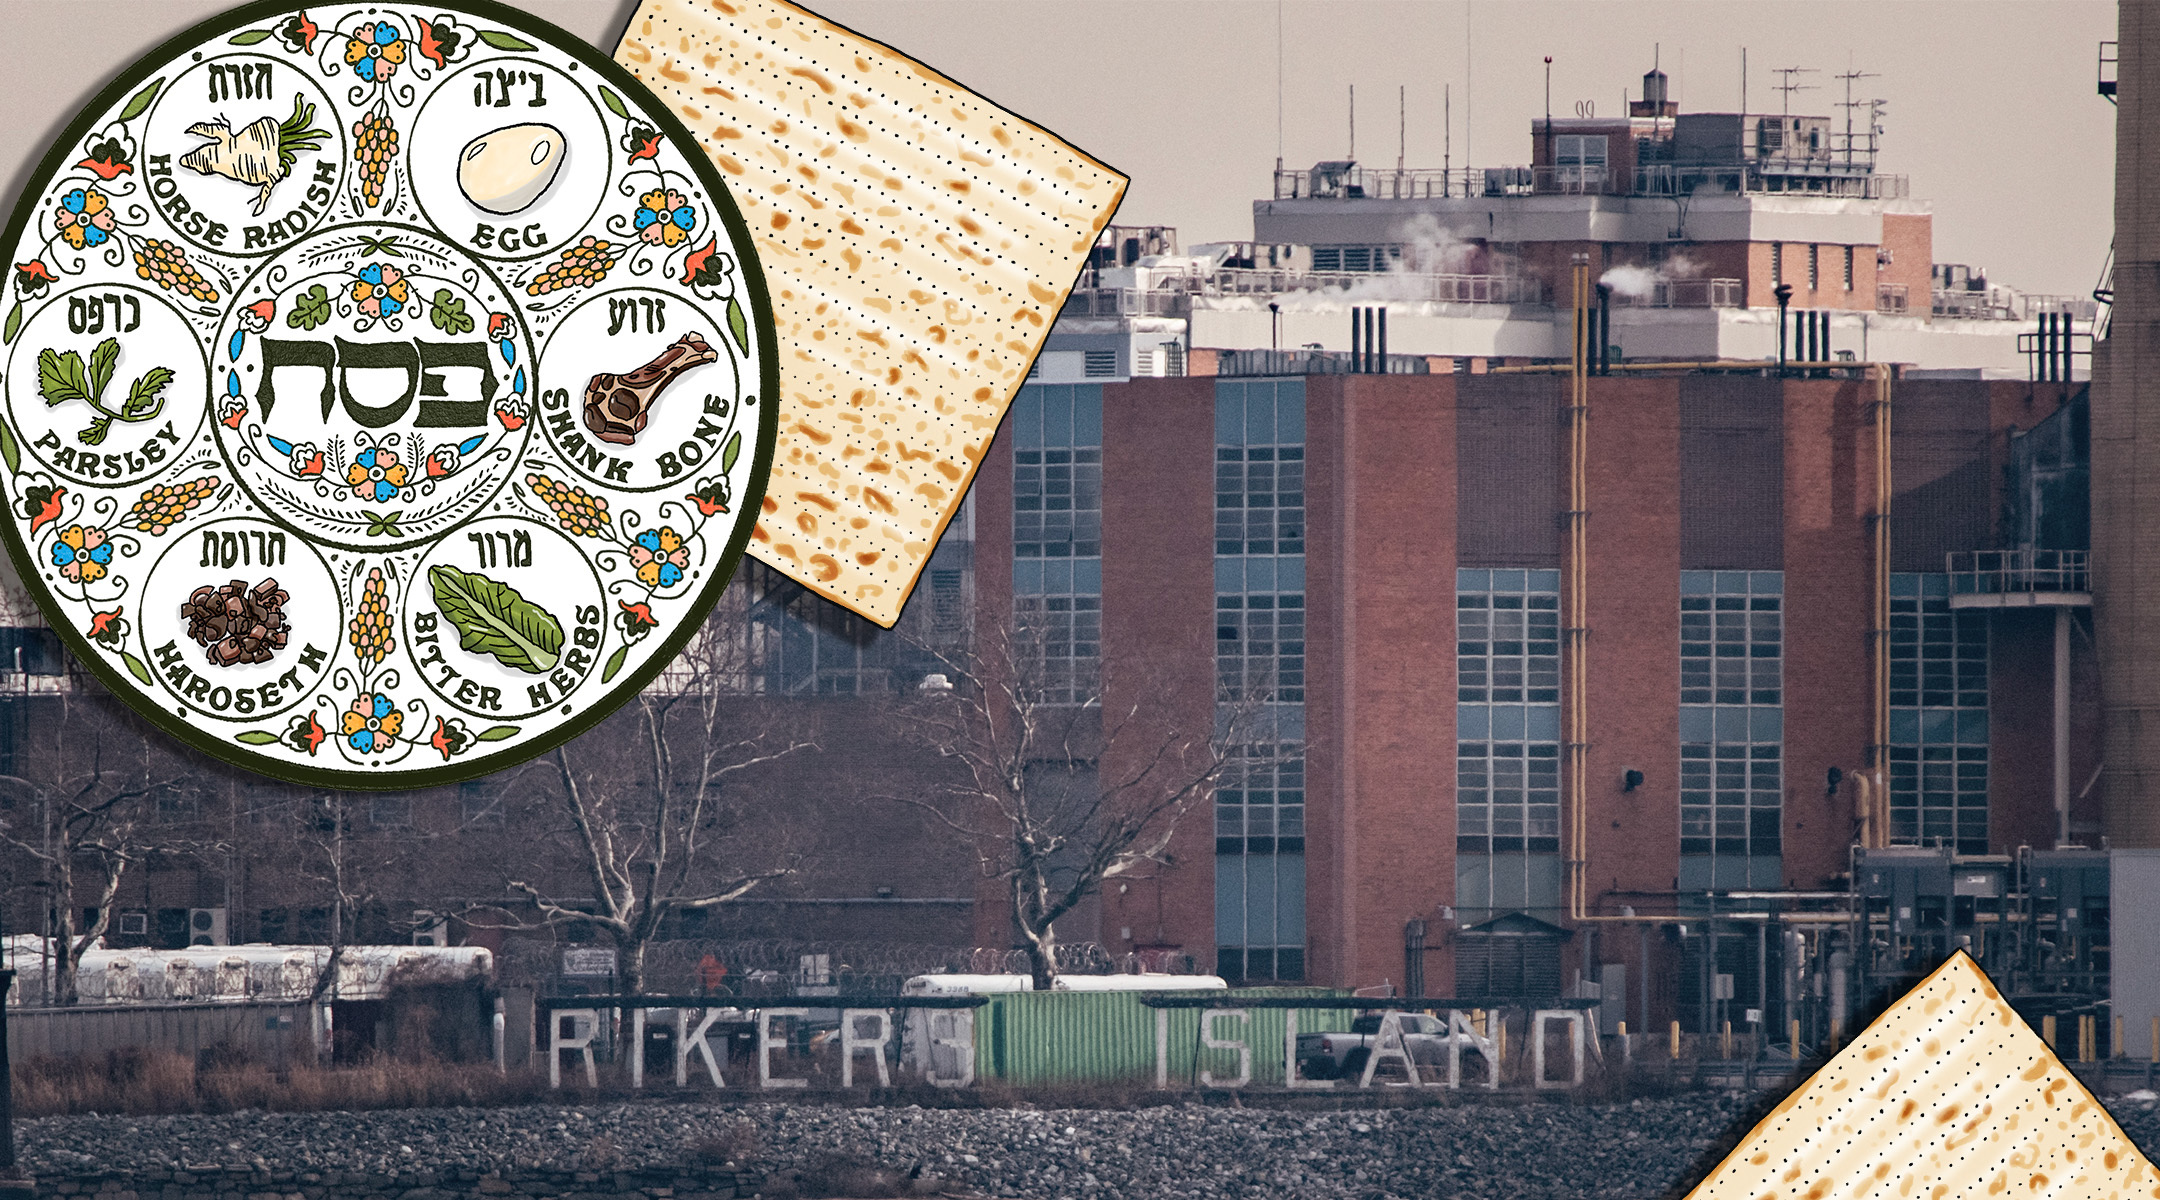 A general view shows the Rikers Island jail complex in the East River of New York, from Queens, on January 13, 2022, with a Passover seder and matzah illustration. (Ed JONES/Getty Images/ Illustration by Mollie Suss)